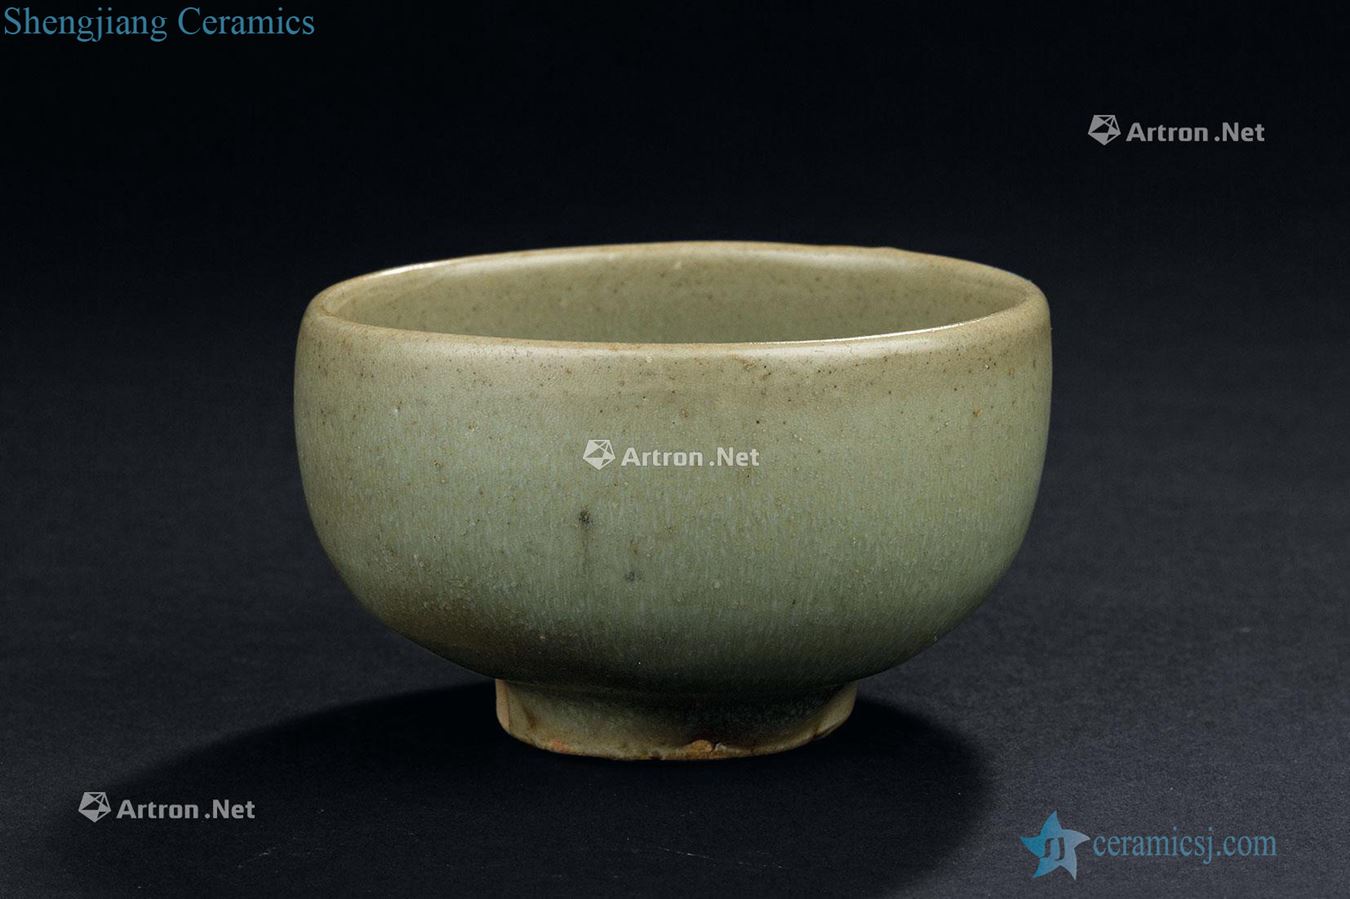 Yuan dynasty (1279-1368), the pa per cup